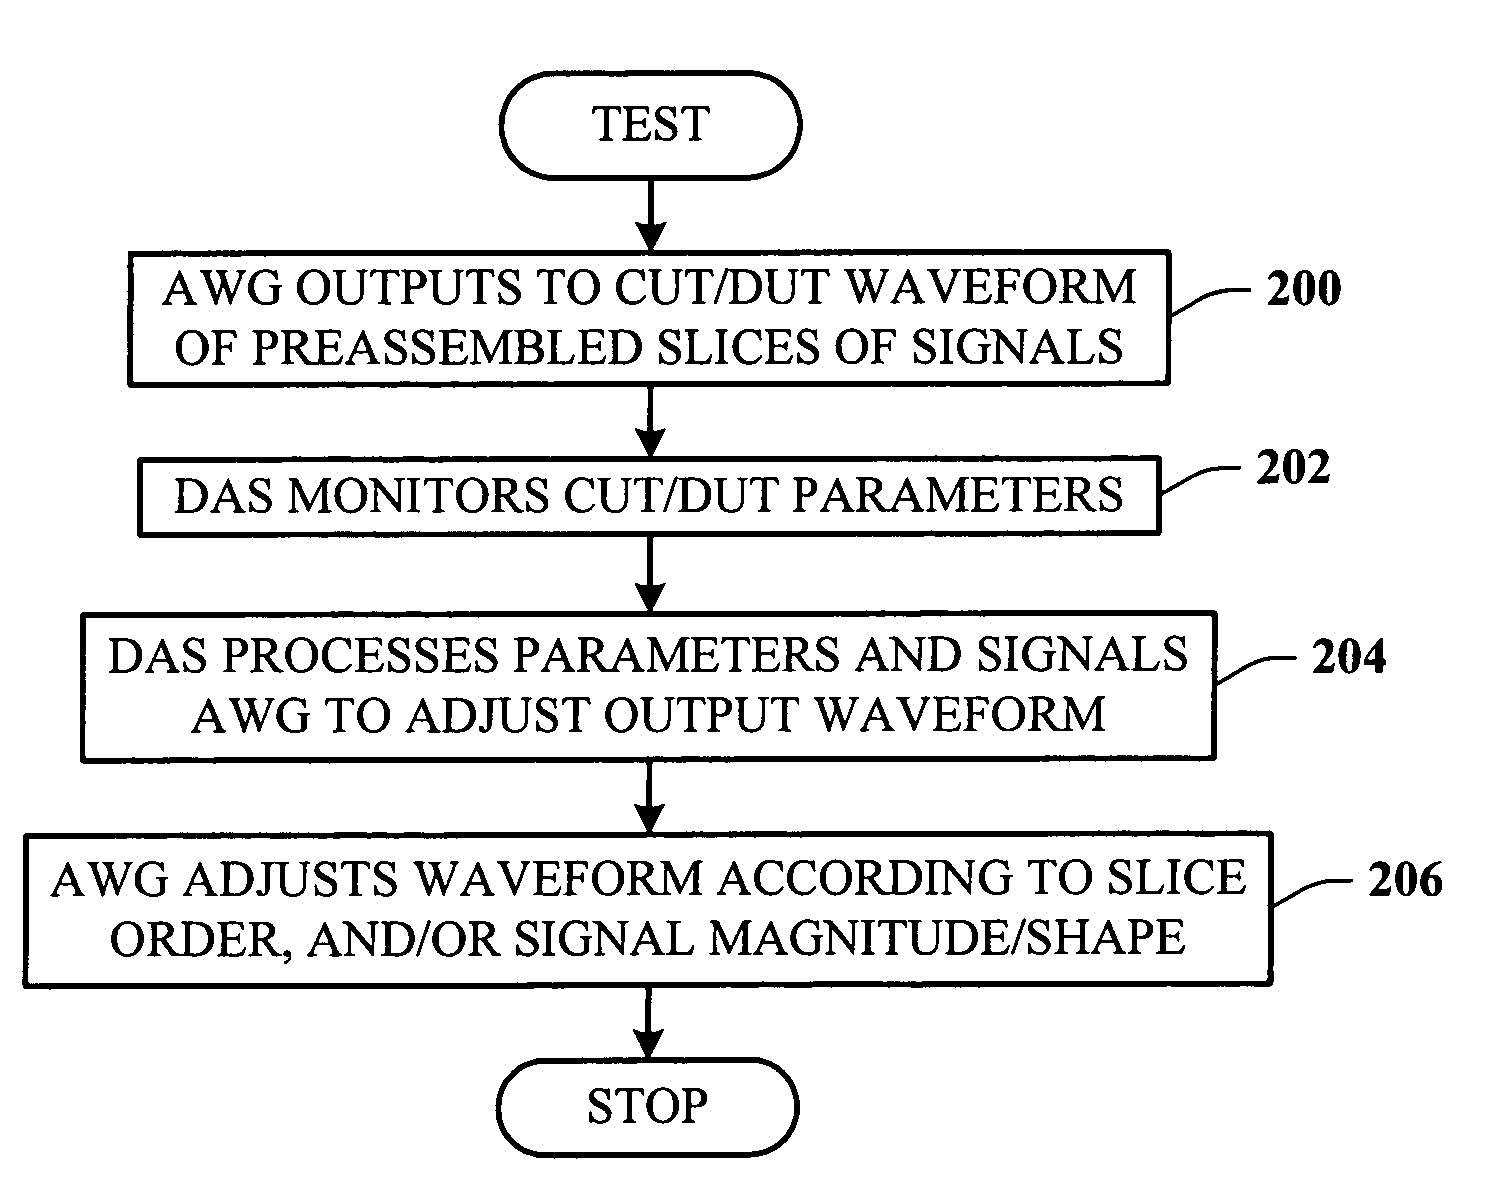 Architecture for generating adaptive arbitrary waveforms